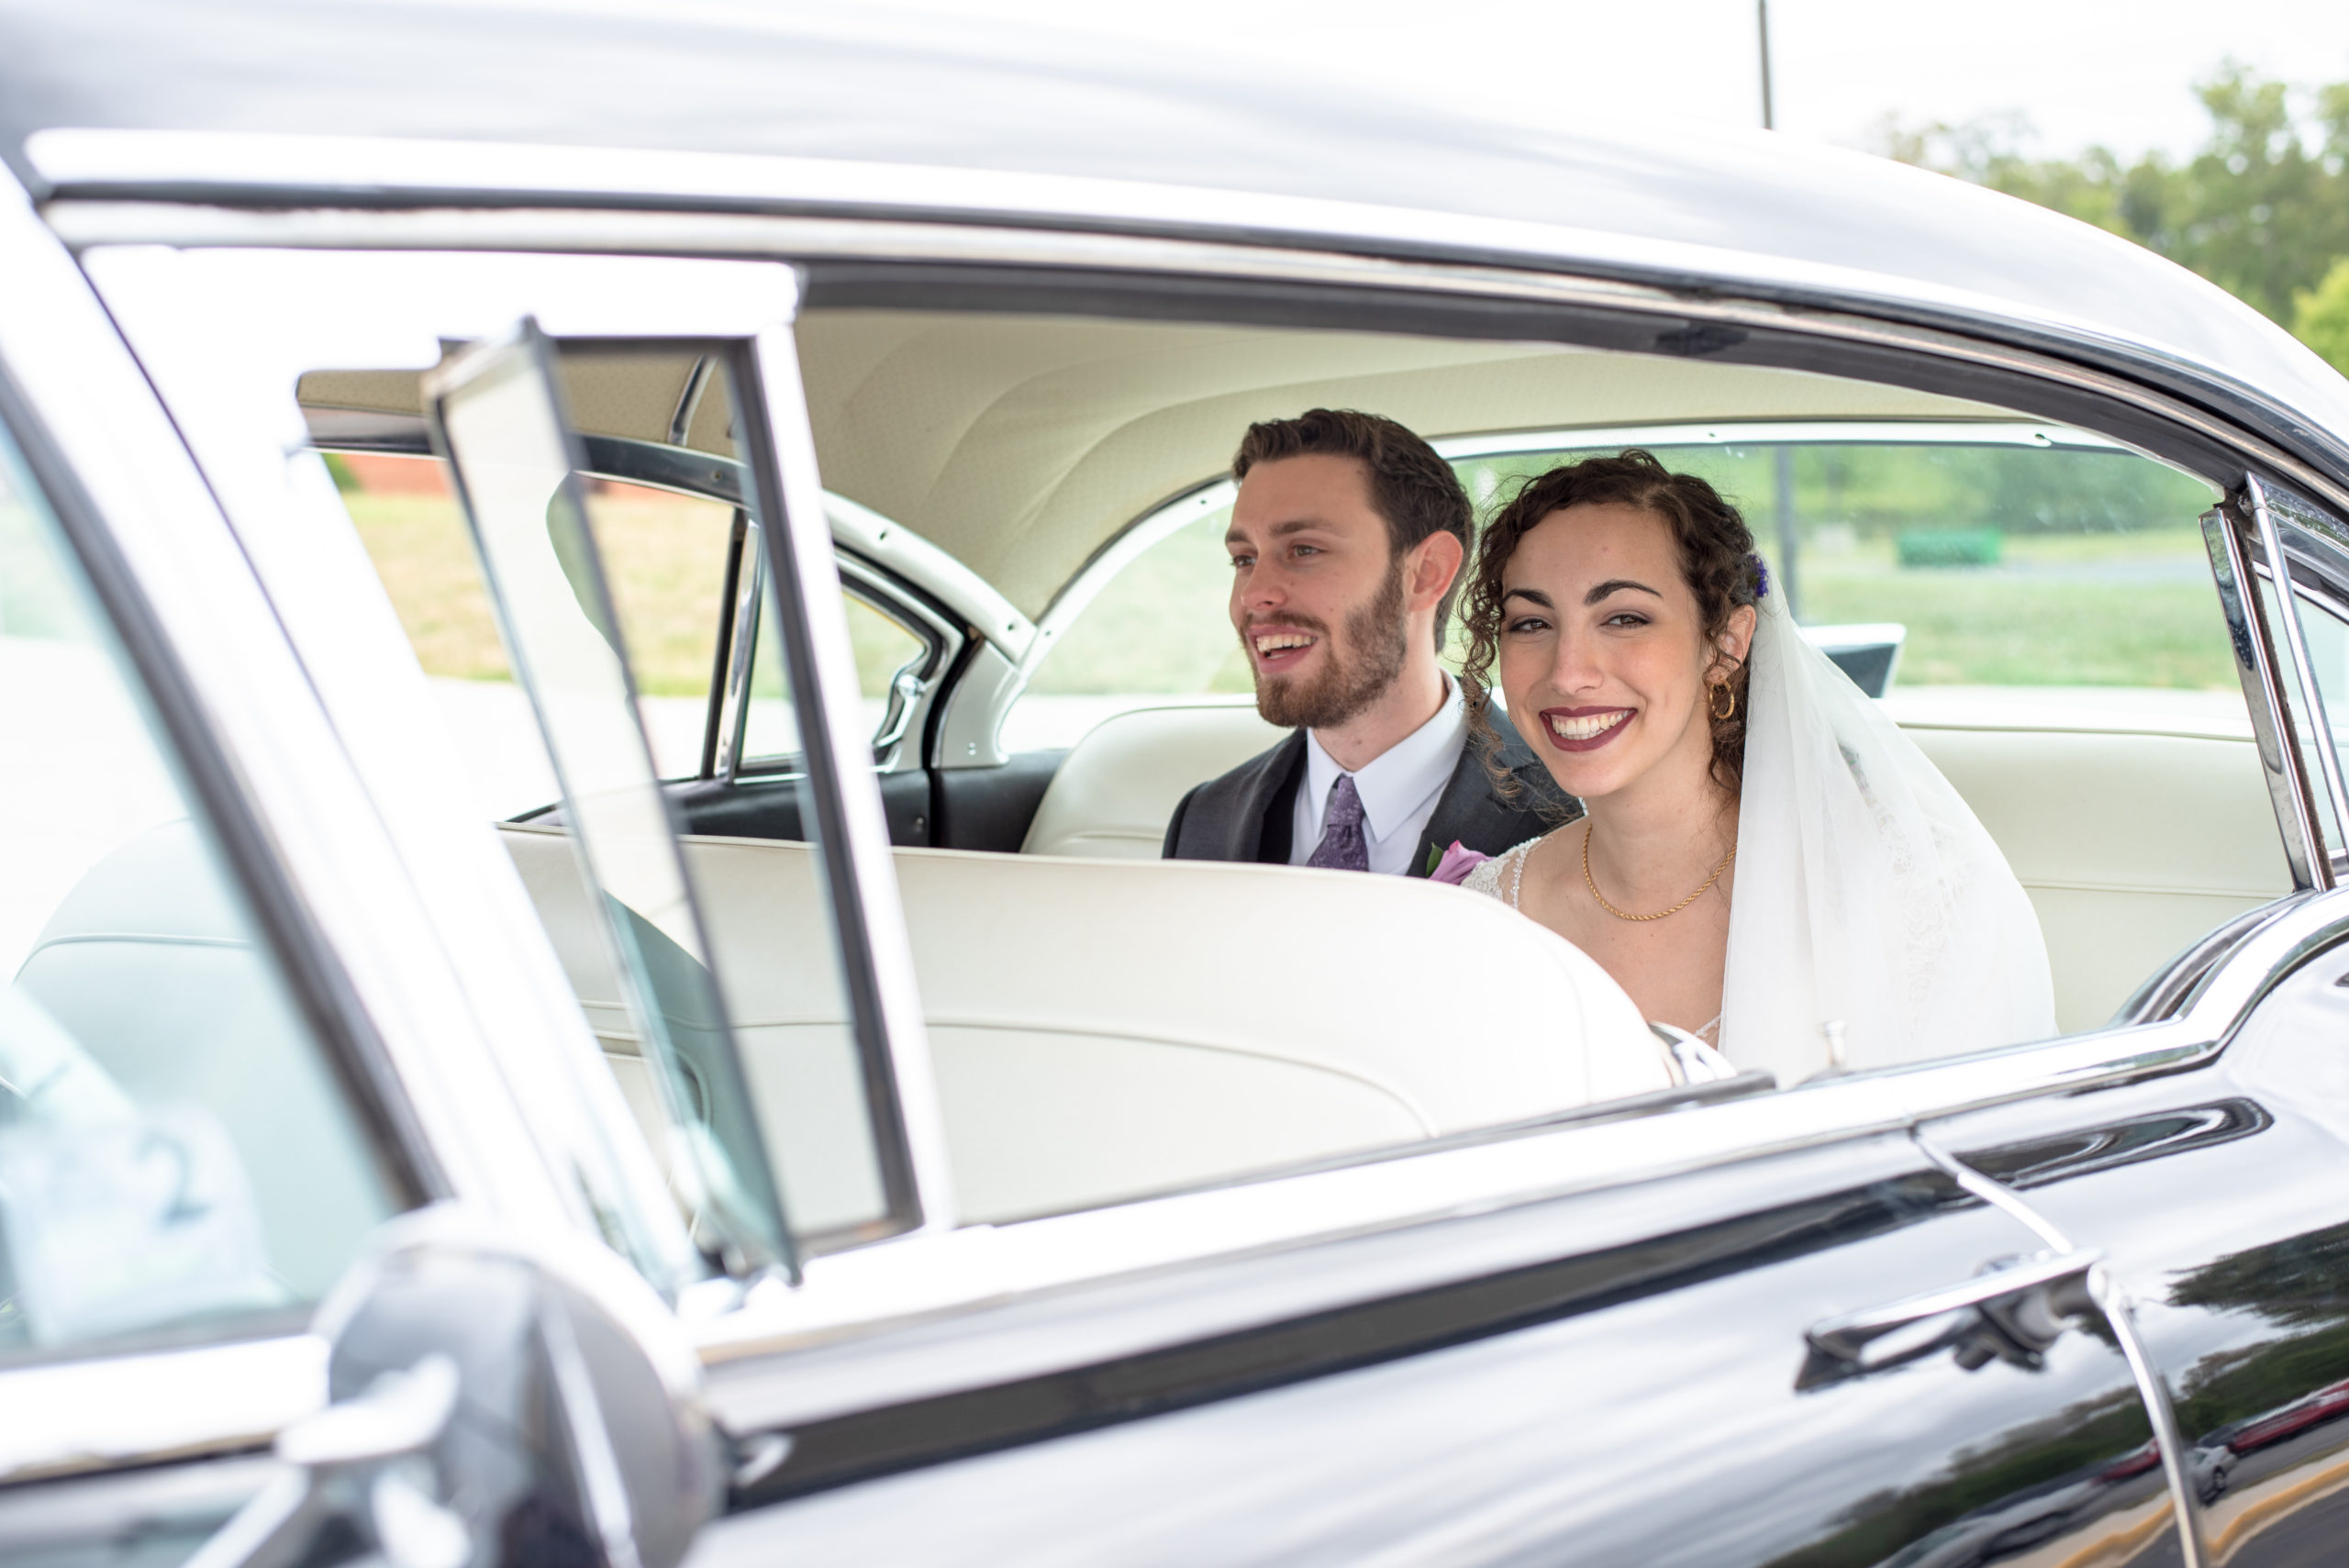 Bride and groom in the back of rented vintage Cadillac car on wedding day